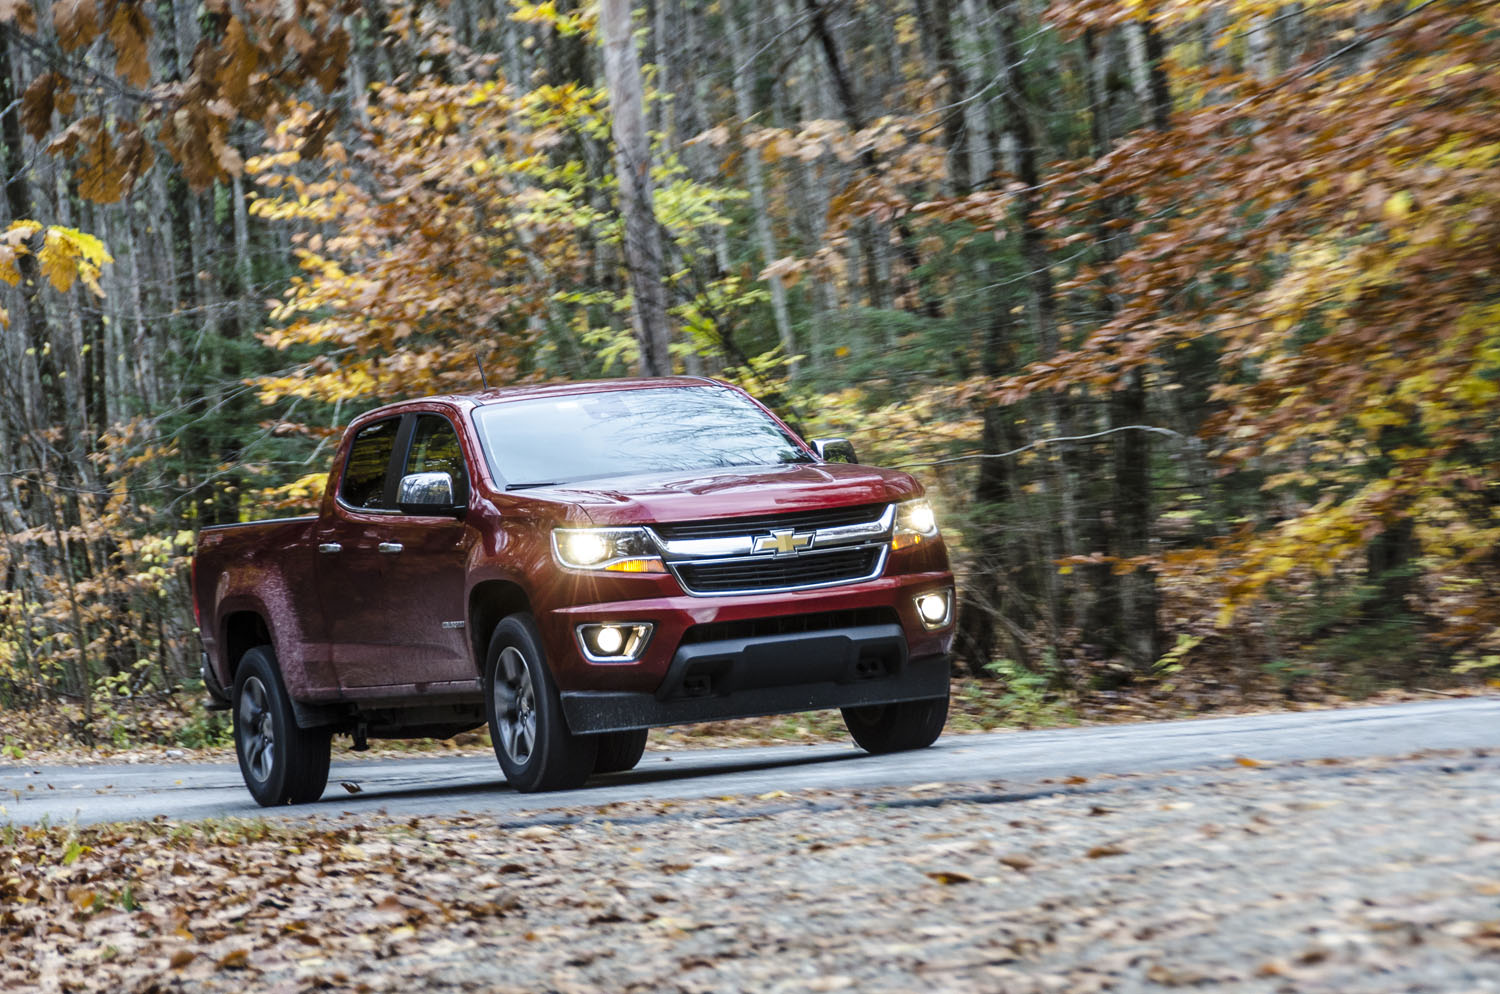 More information about "Live Review: 2015 Chevrolet Colorado"